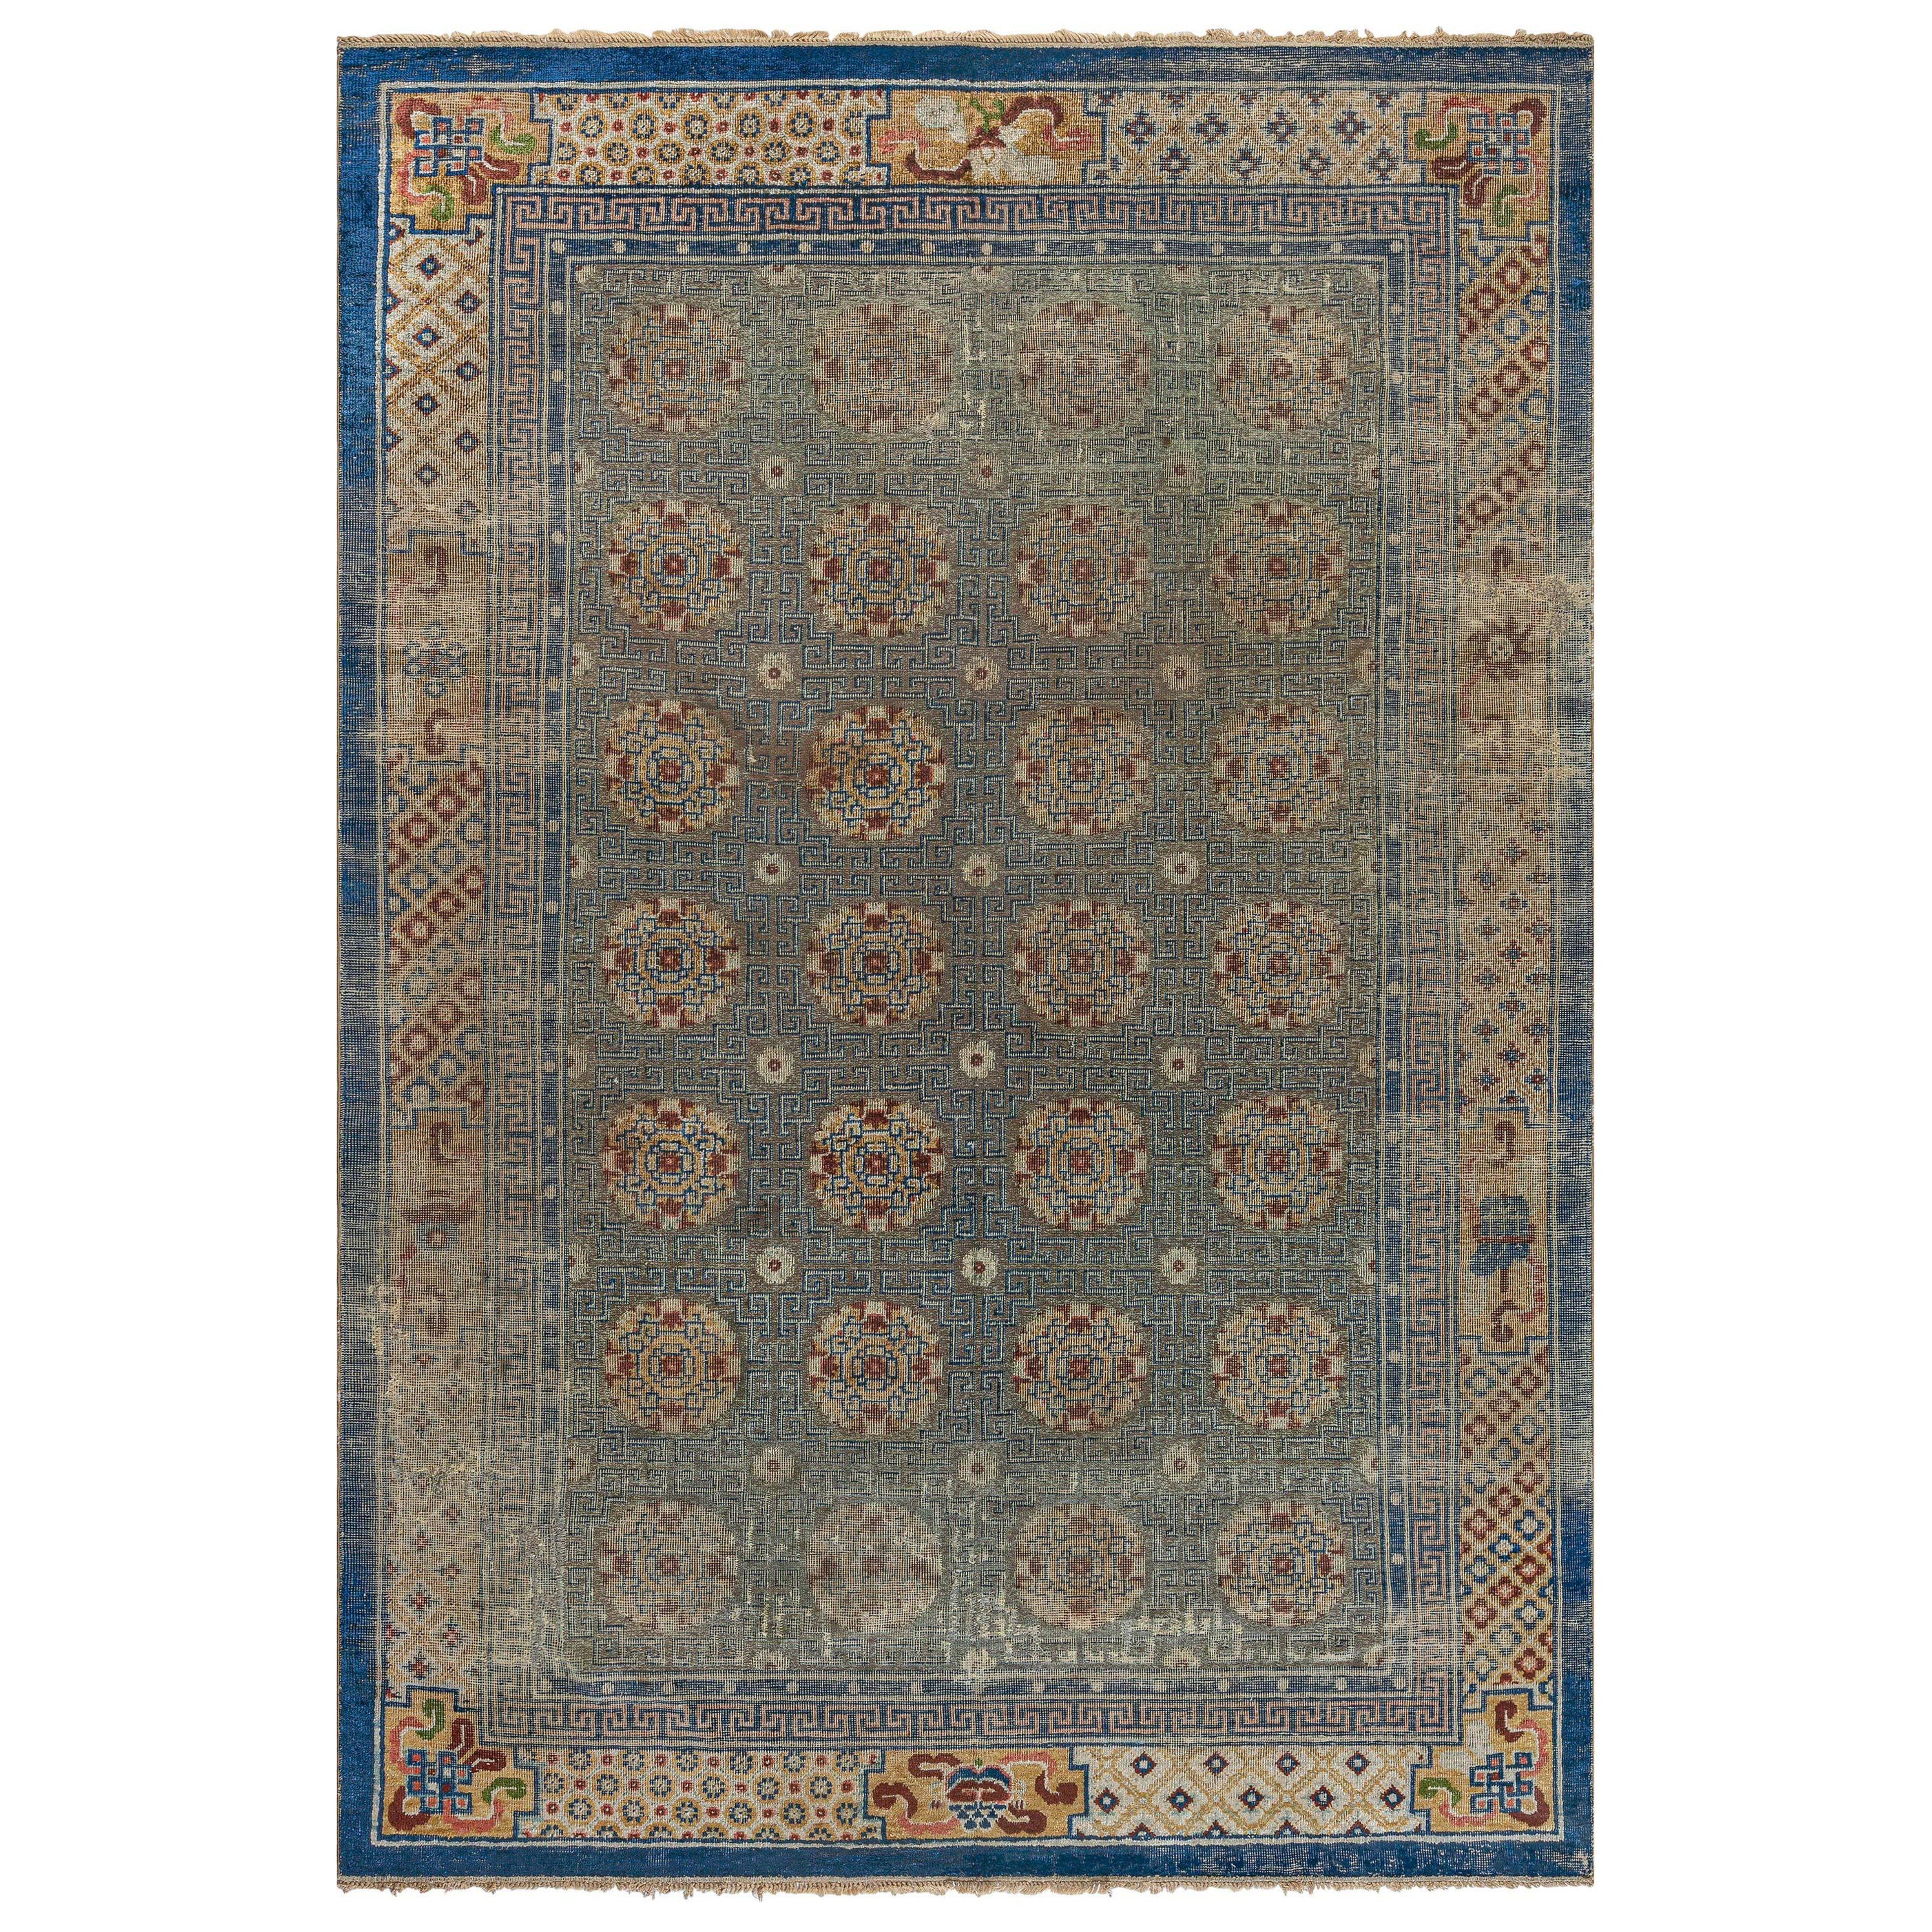 Antique Chinese Handmade Silk and Metal Thread Rug